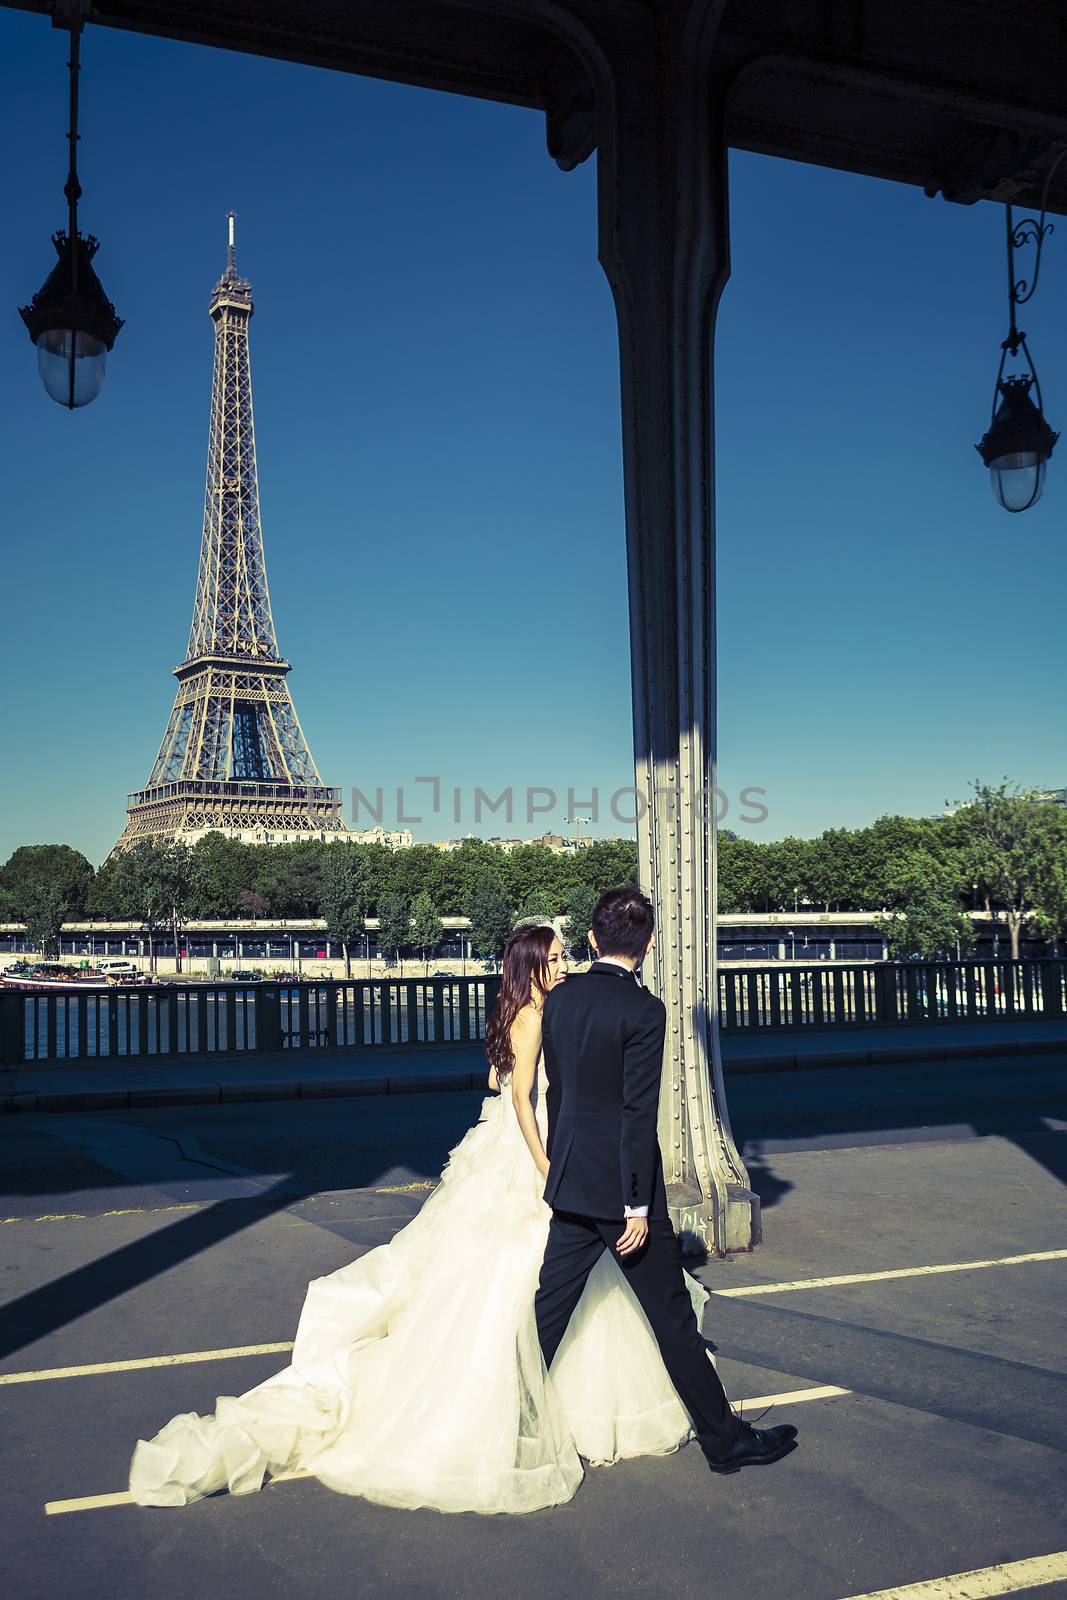 PARIS, FRANCE - JUNE 16: Wedding photography of new married couple on a bridge with Eiffel Tower on background, Paris on June 16, 2015.